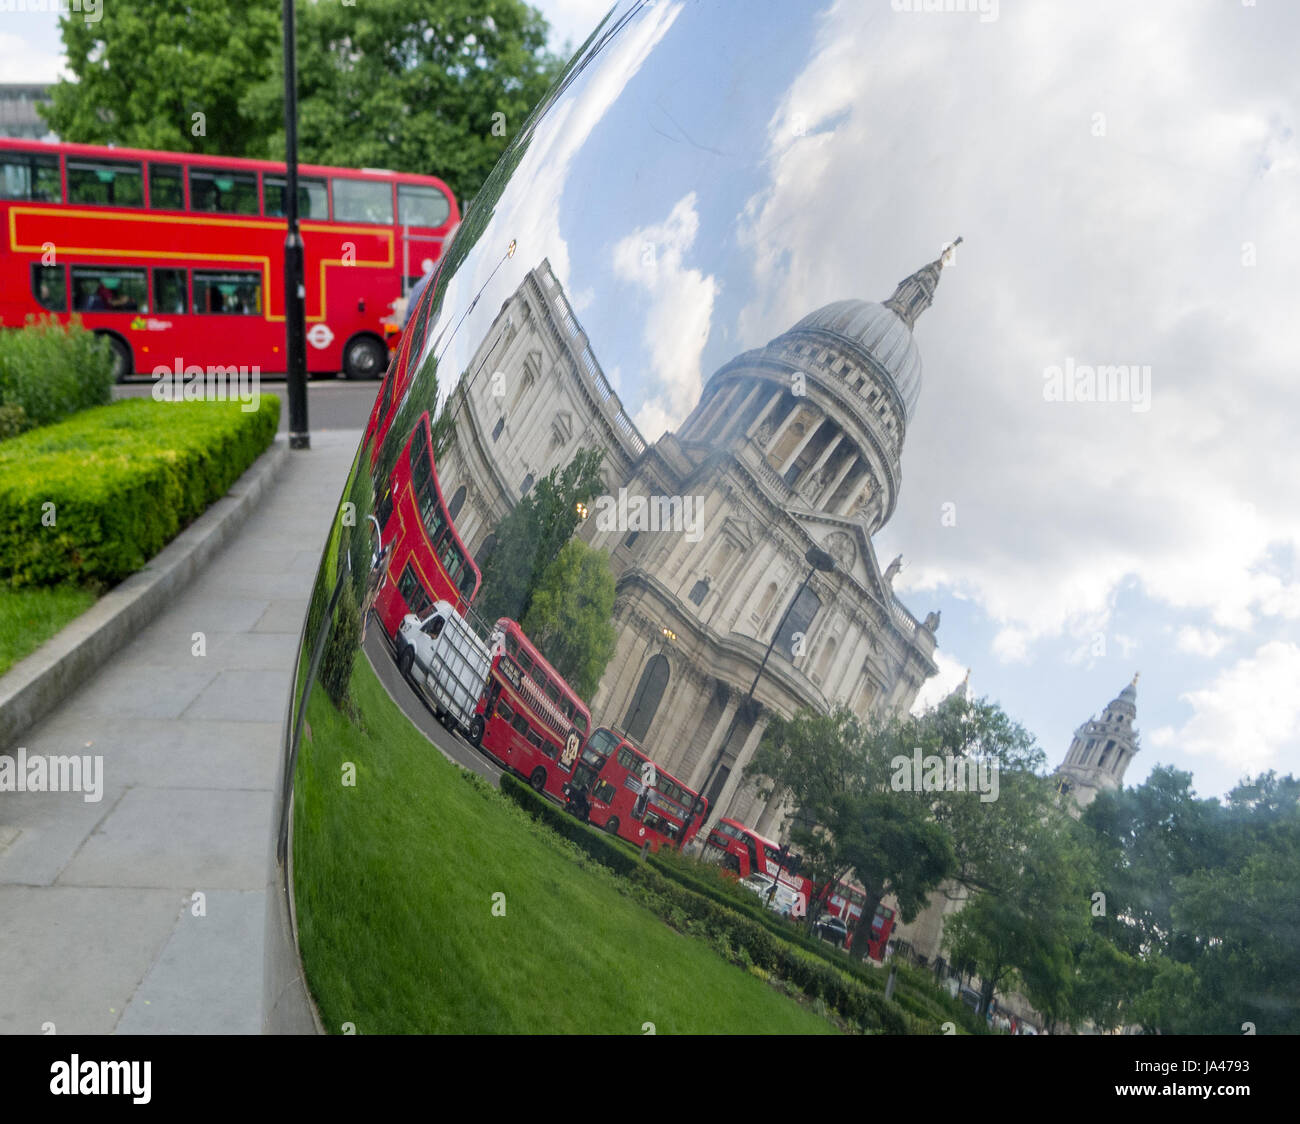 St Paul's Cathedral and London buses reflected in metal ball sculpture Stock Photo